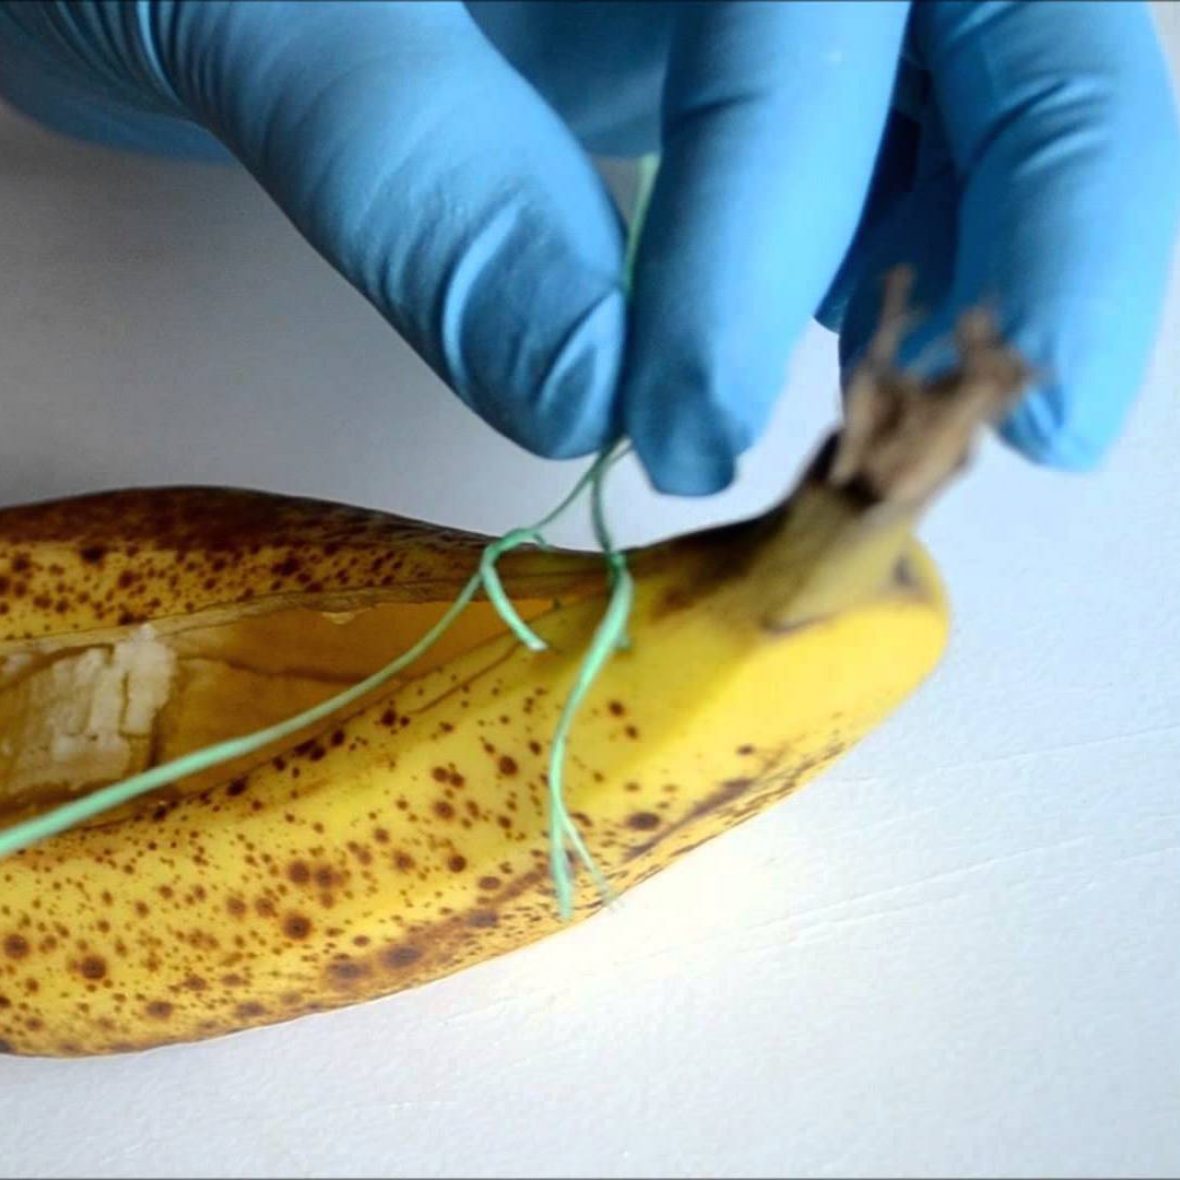 blue-gloved hand practicing stitches on a cut banana